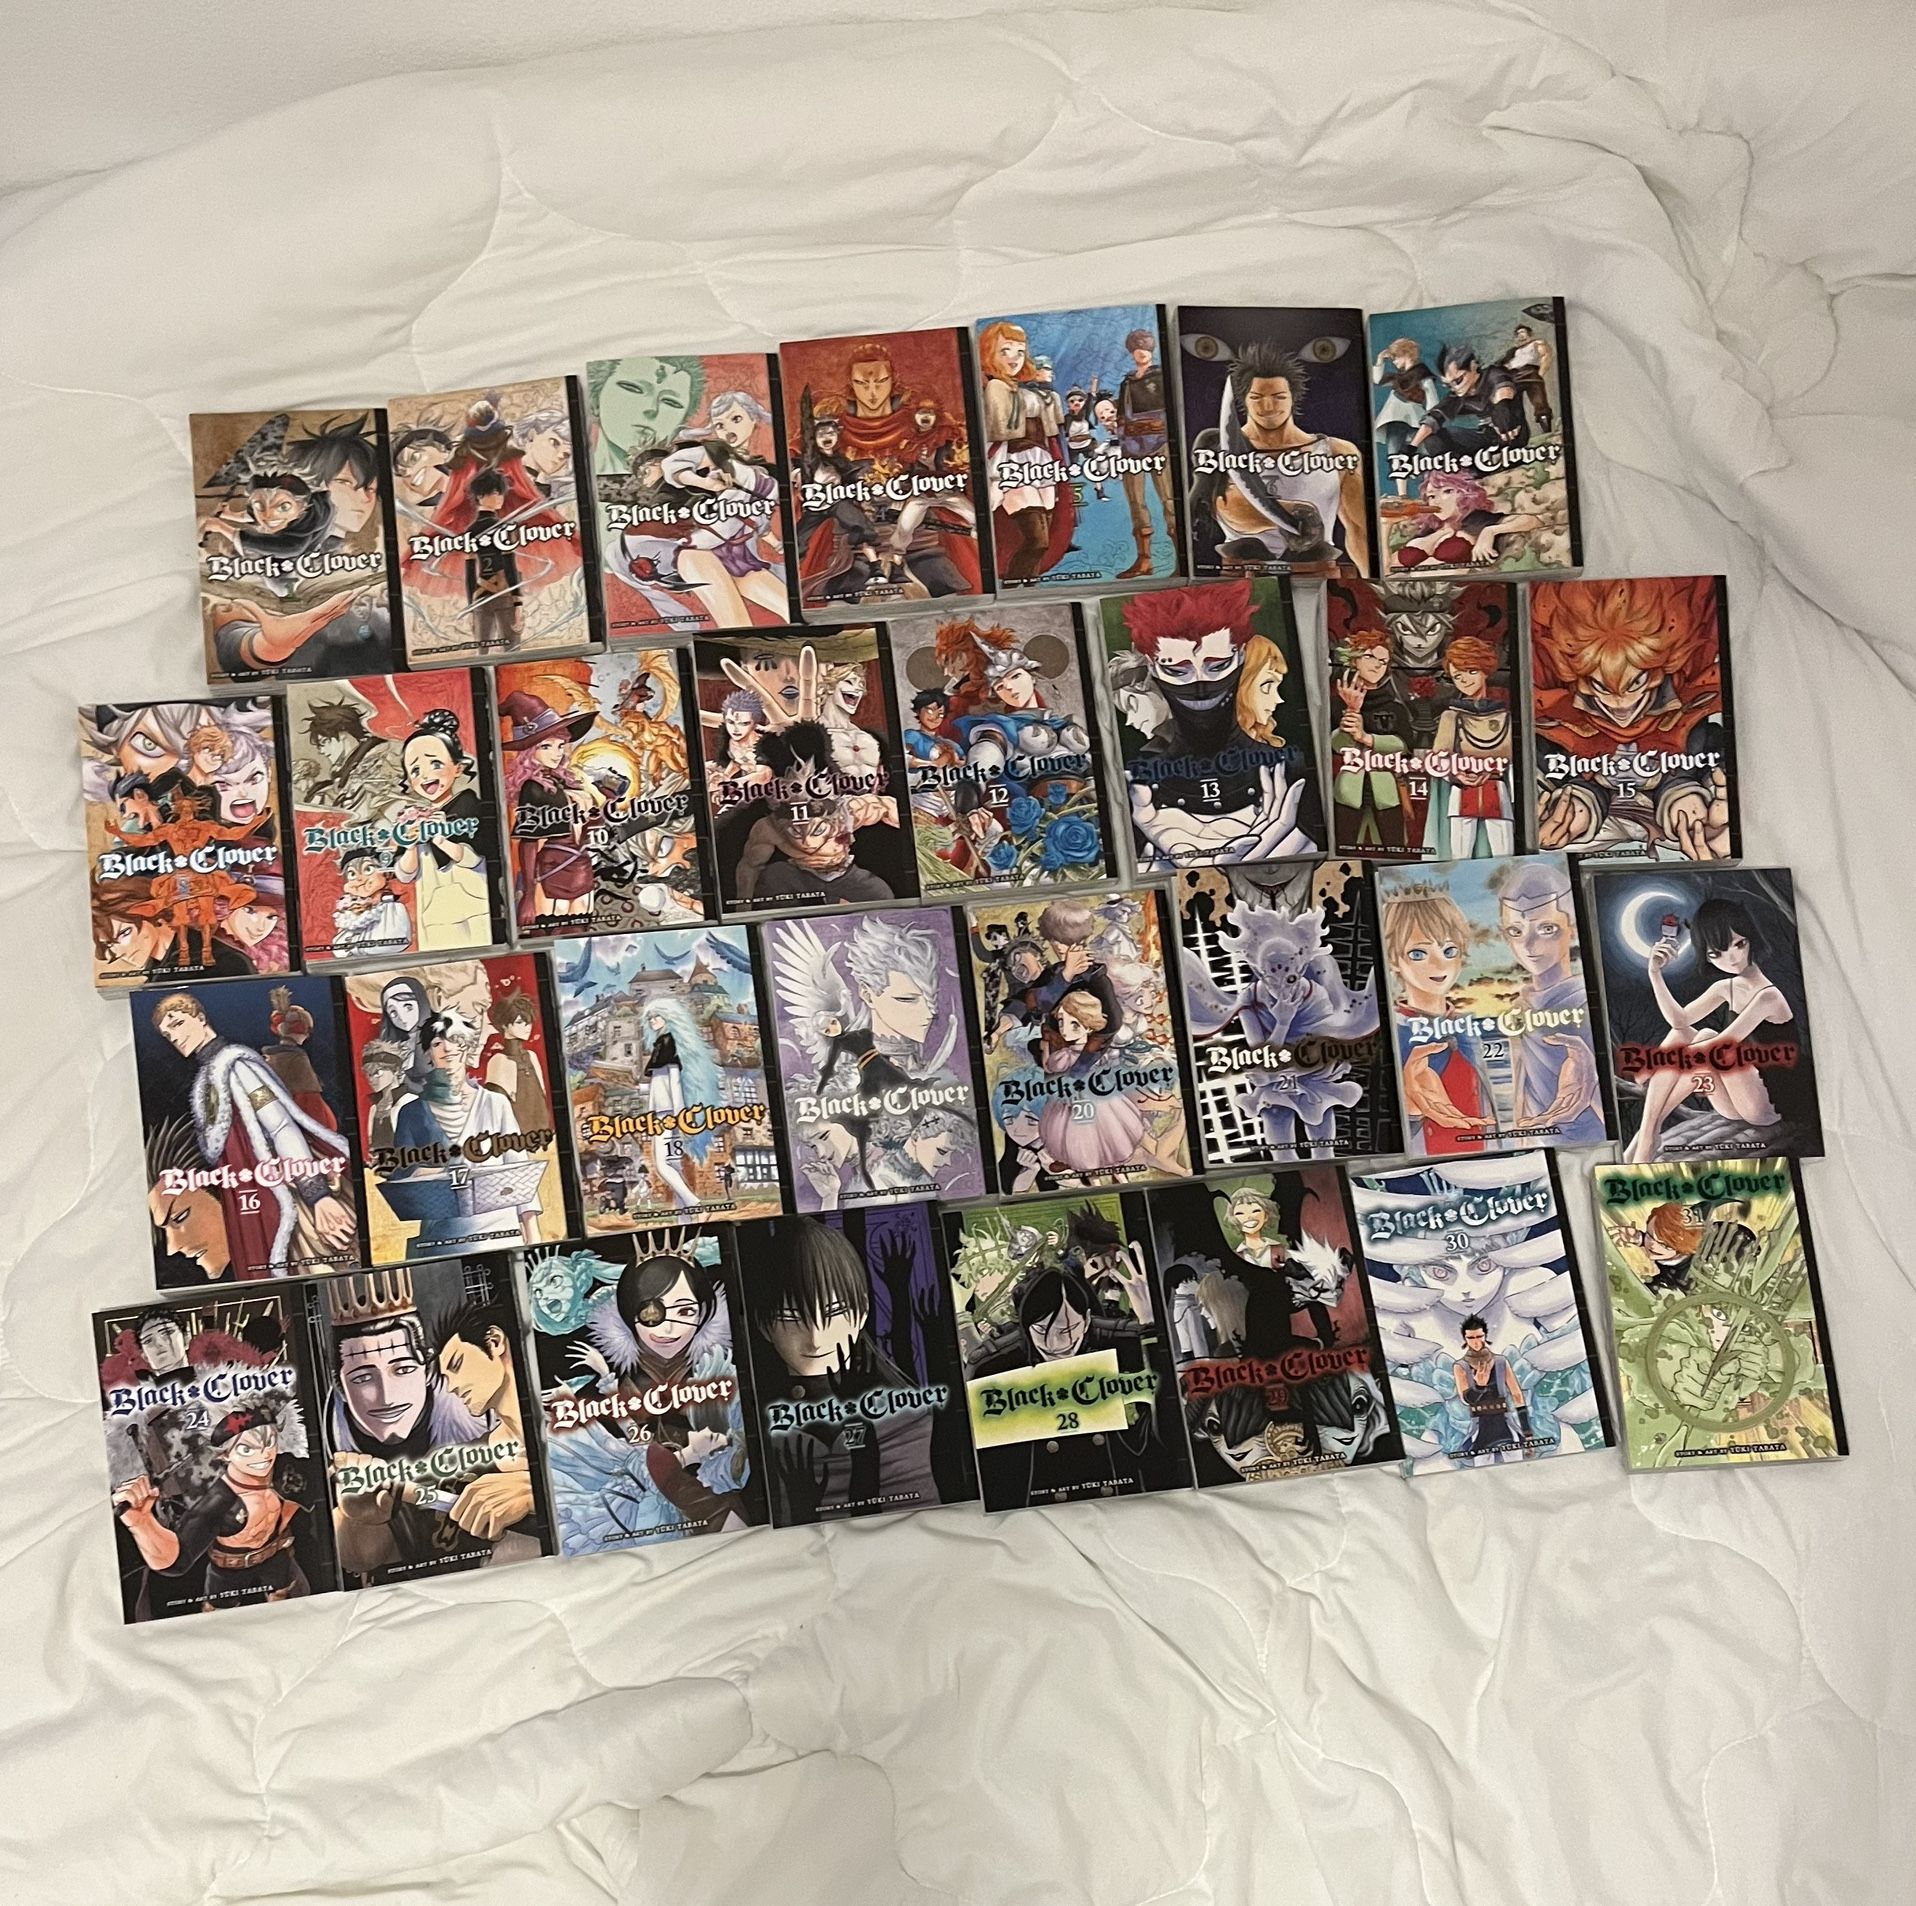 Manga Collection My Hero, Berserk, Black Clover, One Punch Man, Chainsaw Man, Tokyo Ghoul, 20th Century Boys, and more.